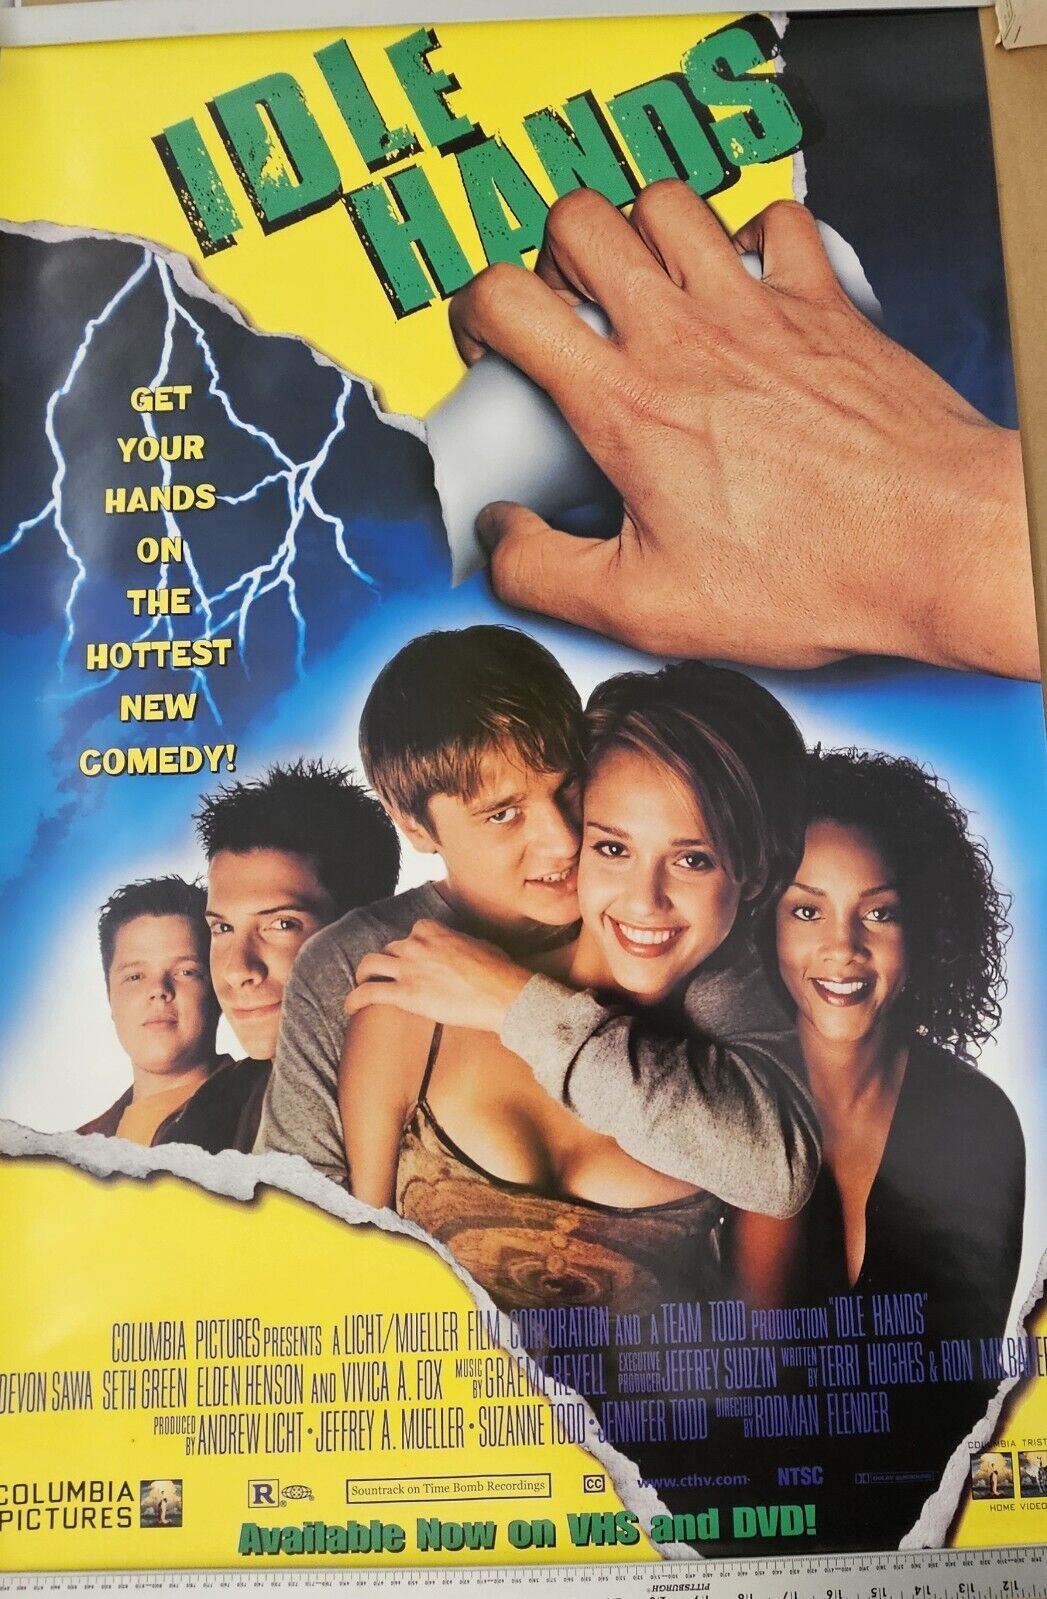 Seth Green Vivica A Fox in  Idle Hands 27 x 40  DVD promotional Movie poster